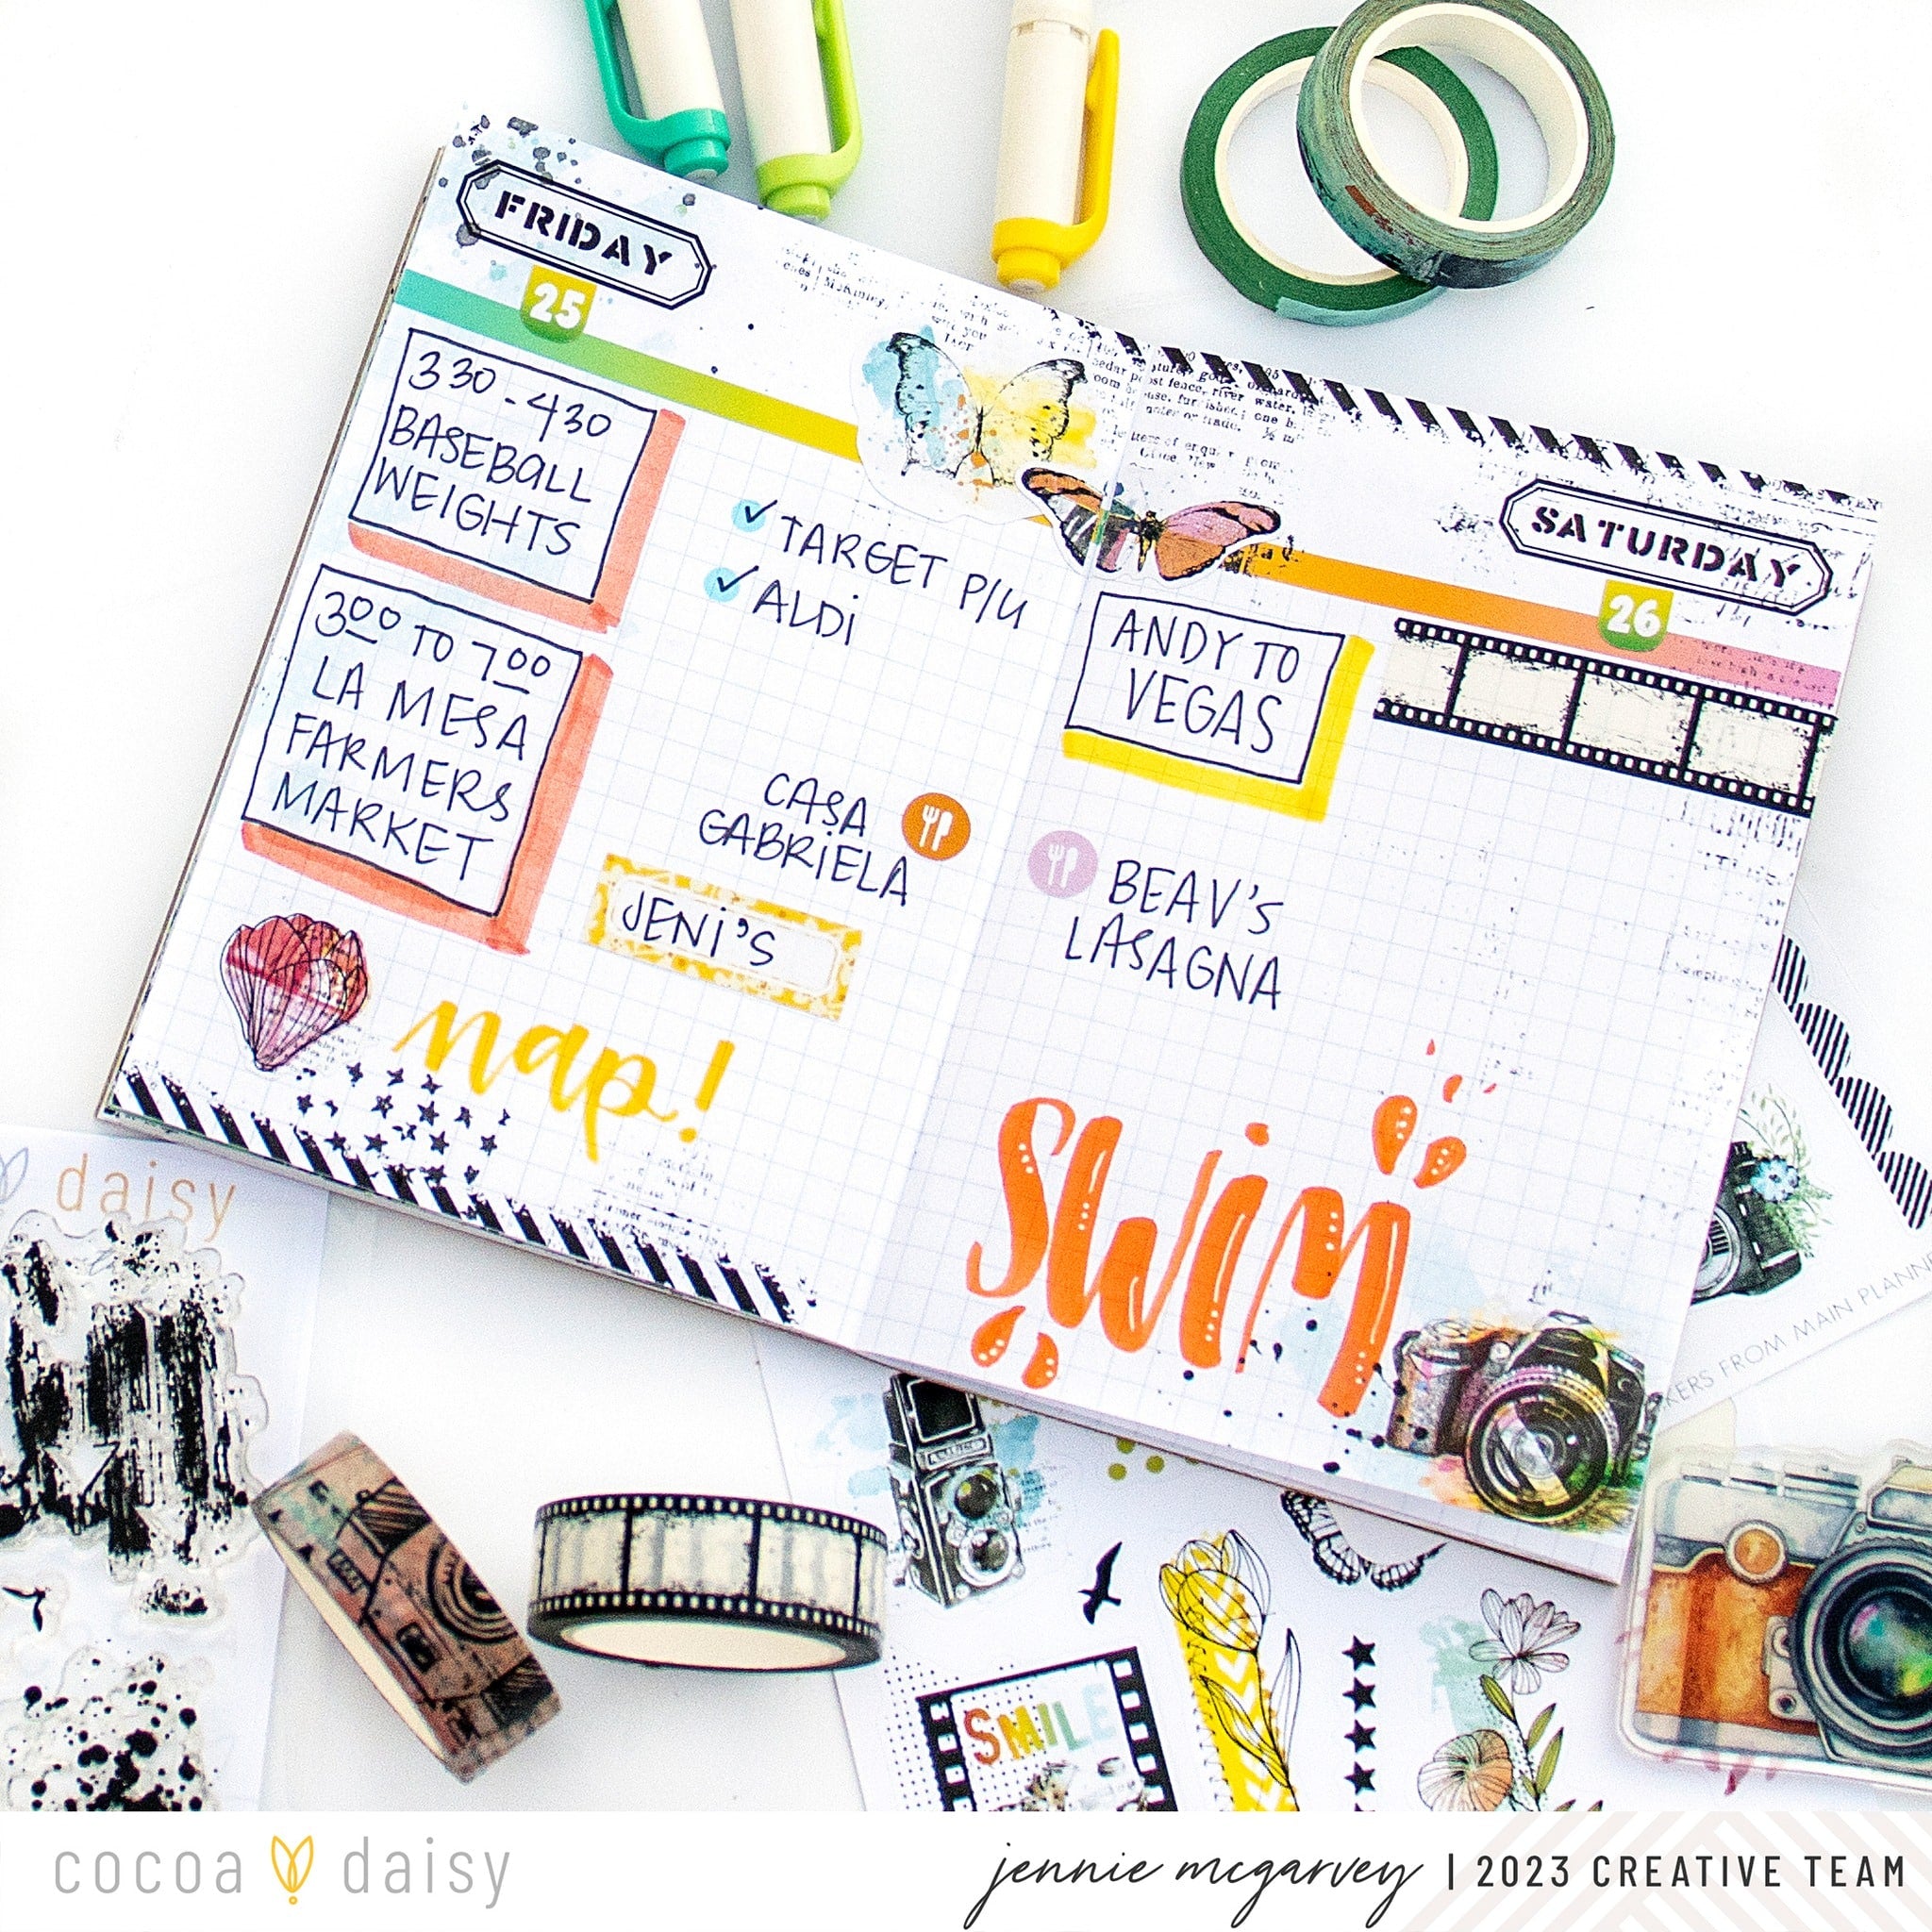 Everyday Planning with Daily Journal!